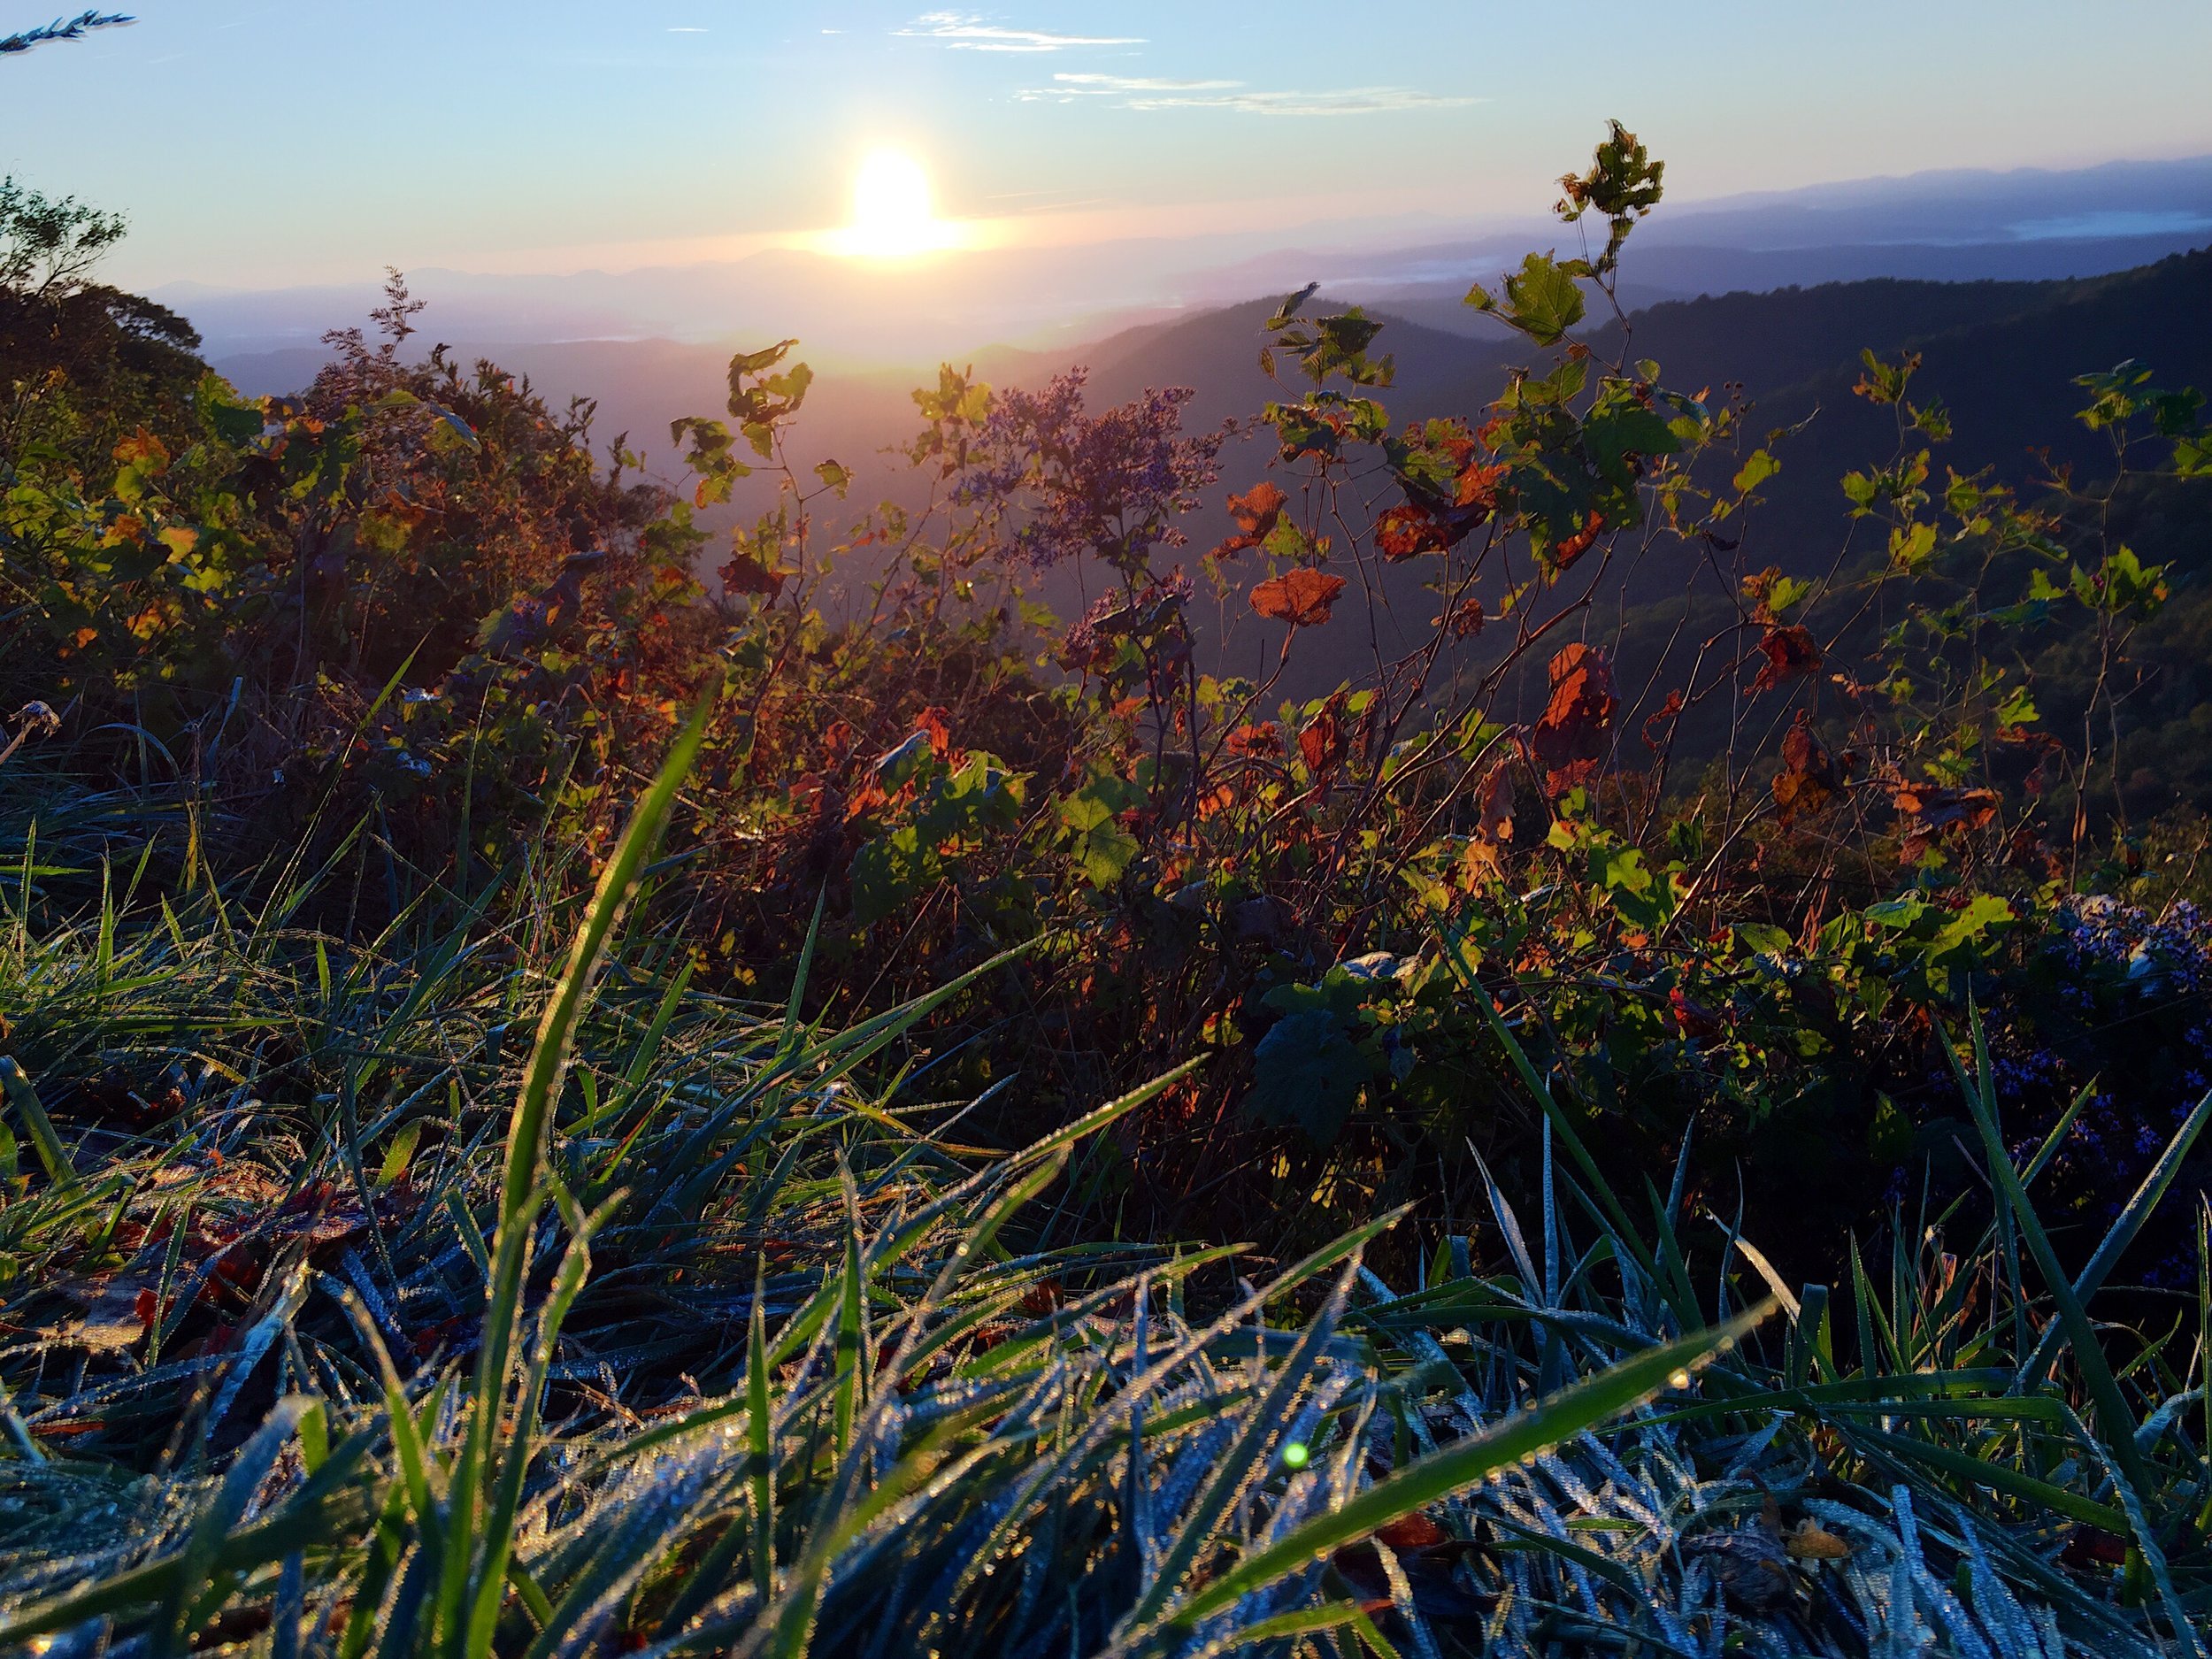  The sun rises over the wild flowers in the Blueridge Mountains 